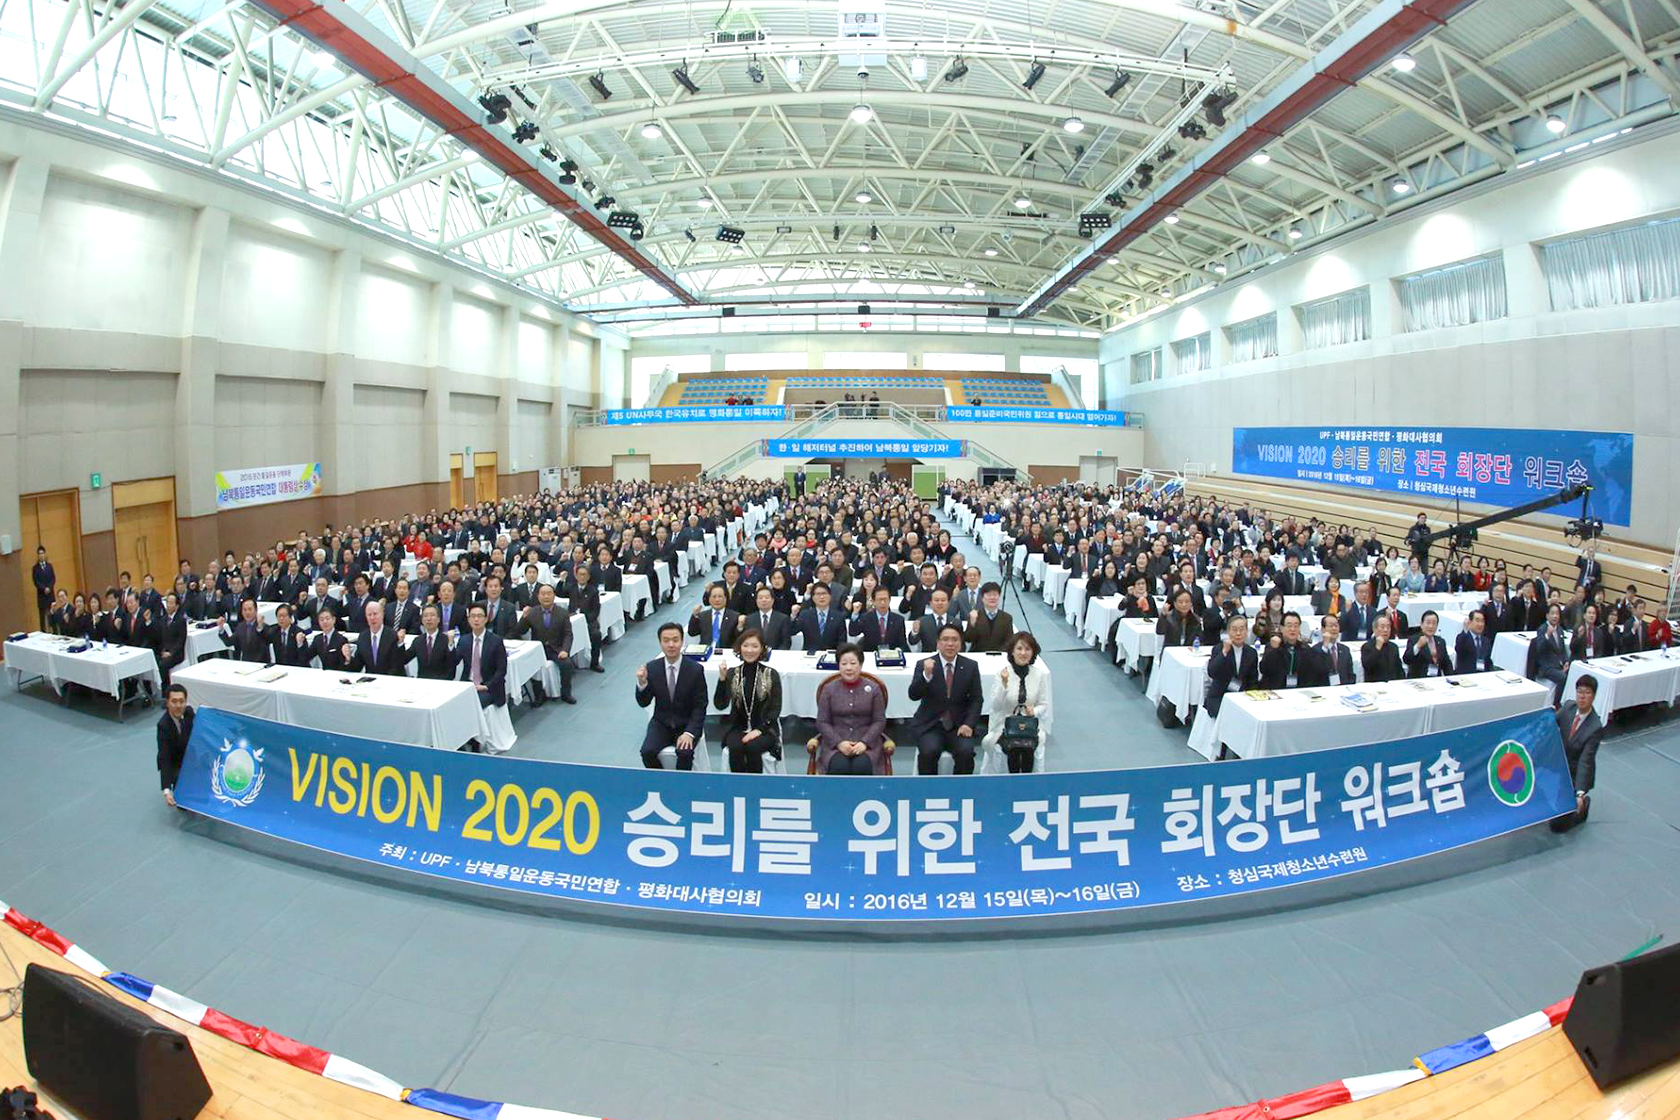 True Mother at the Workshop for Korean Leaders for the Fulfillment of Vision 2020 (December 16, 2016, at Cheong-Ah Camp Cheongpyeong)